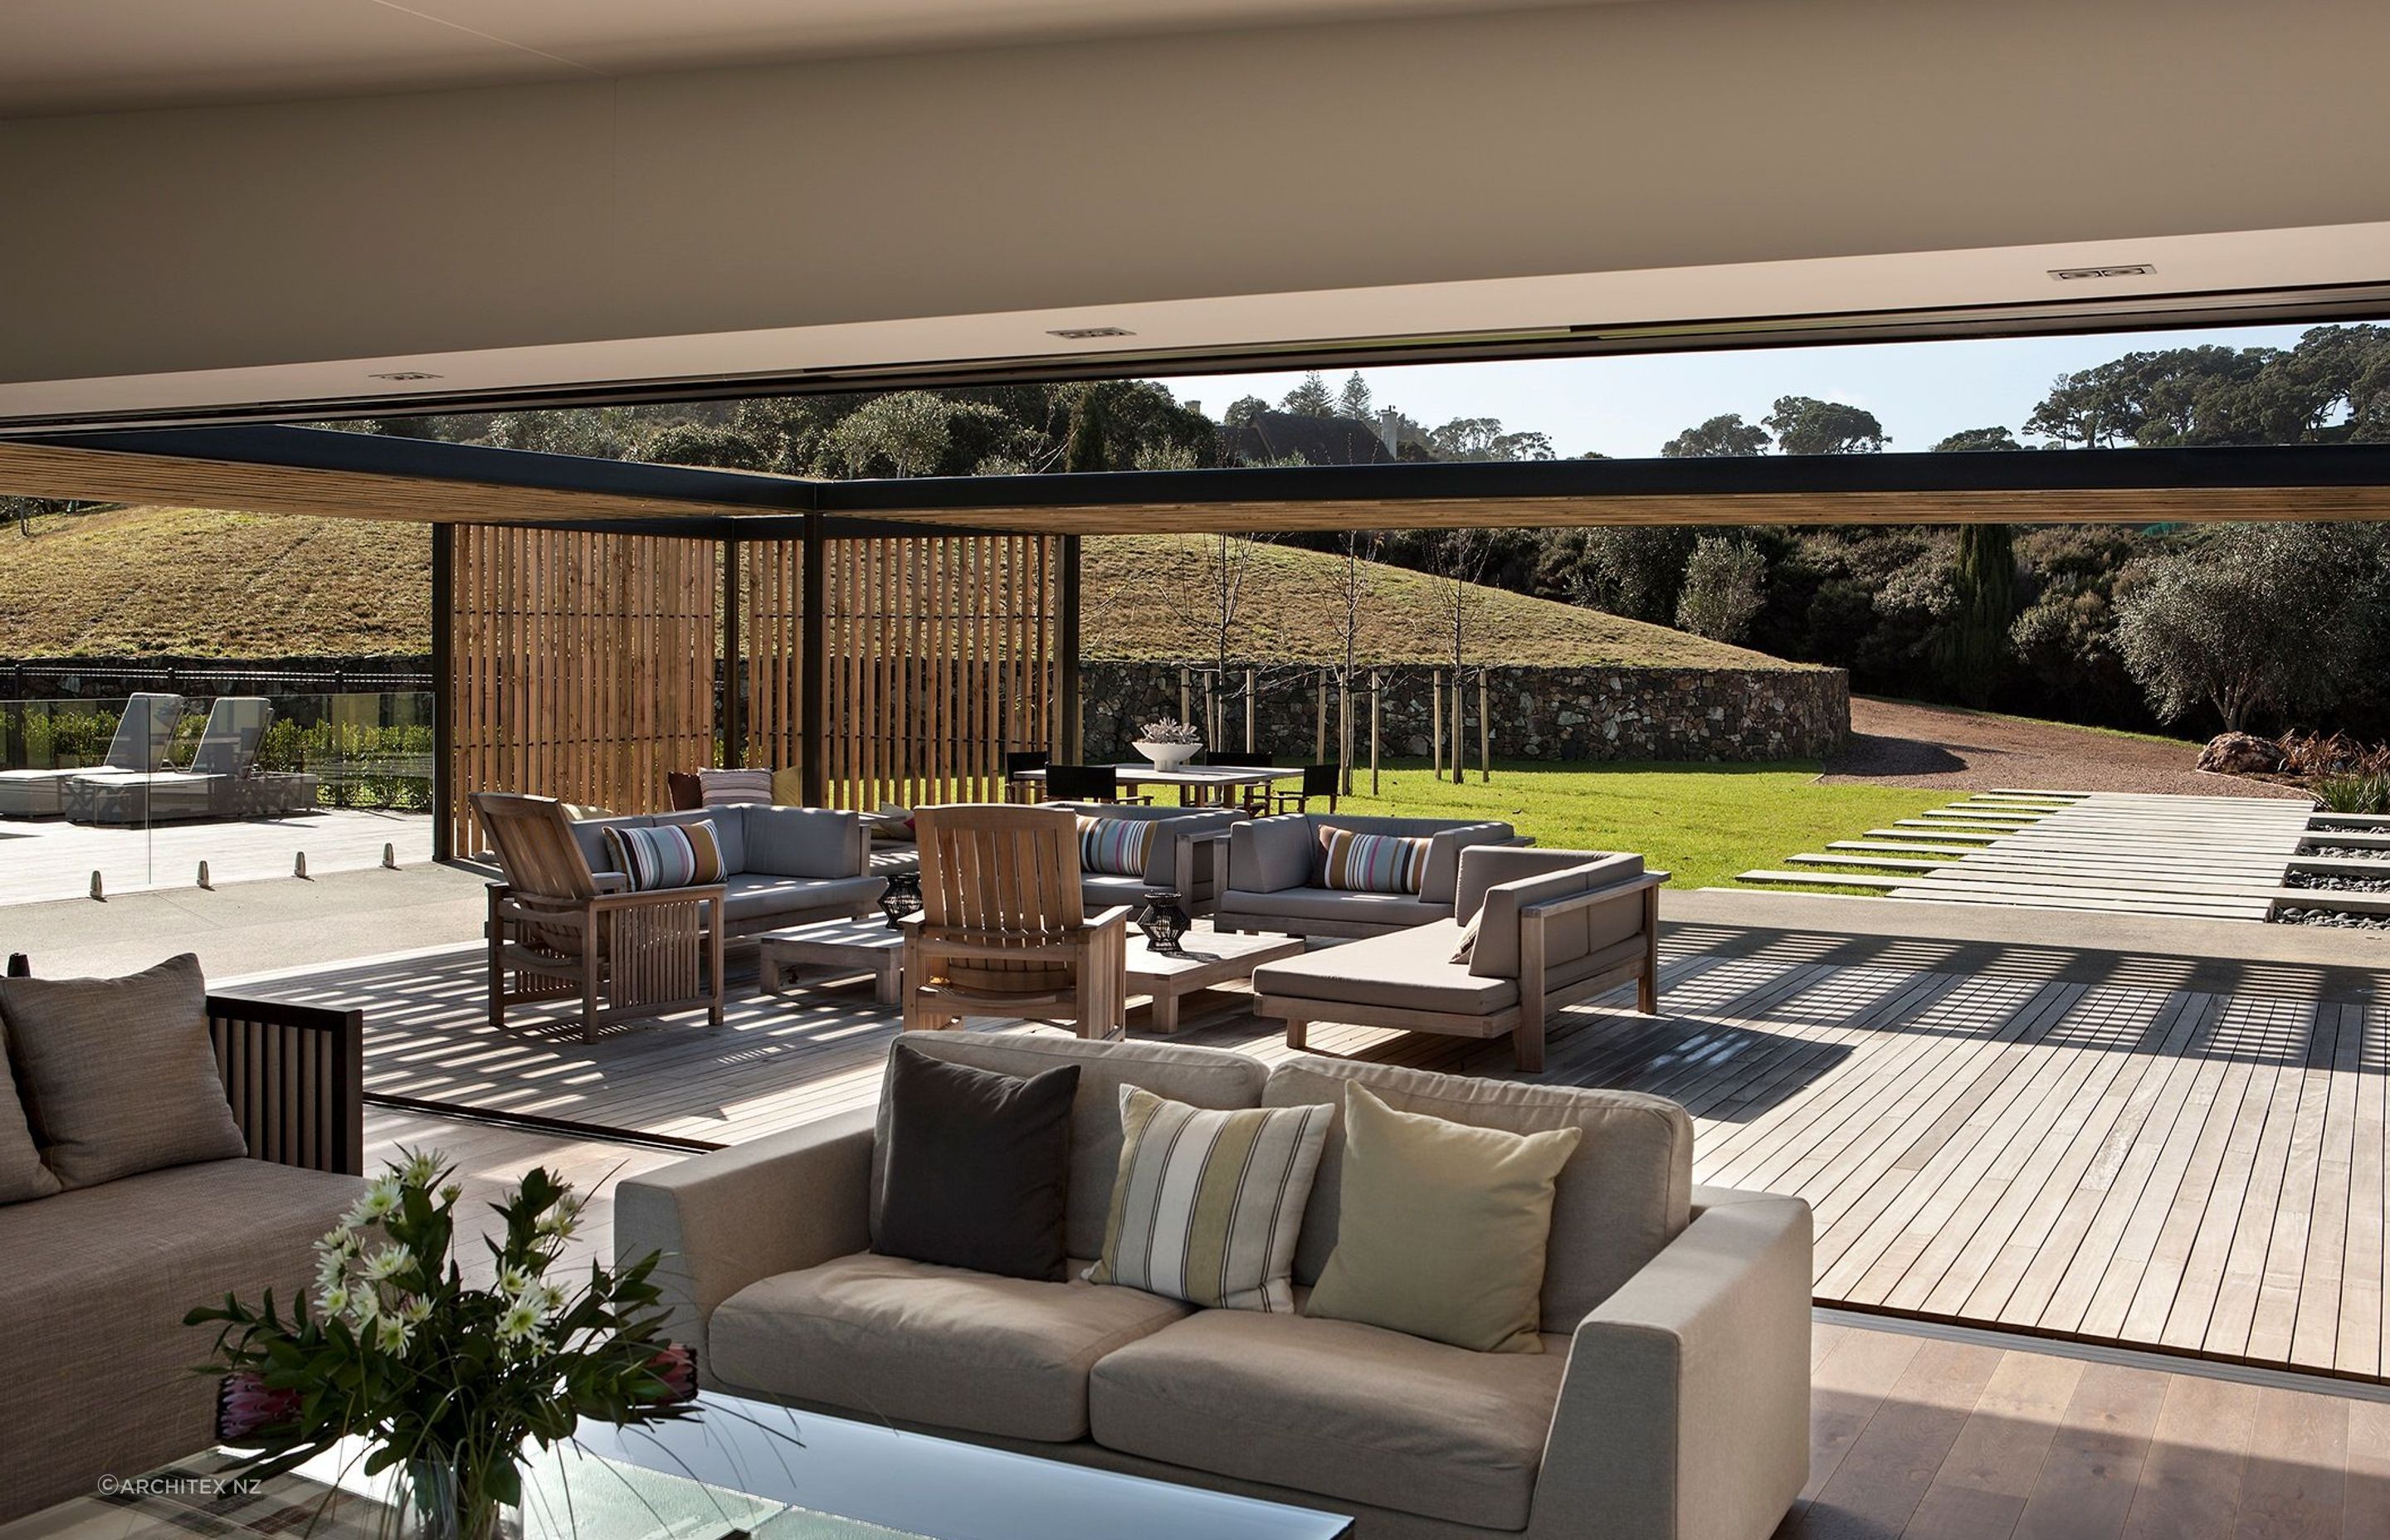 A generous outdoor living space makes this holiday home an idyllic summer retreat.